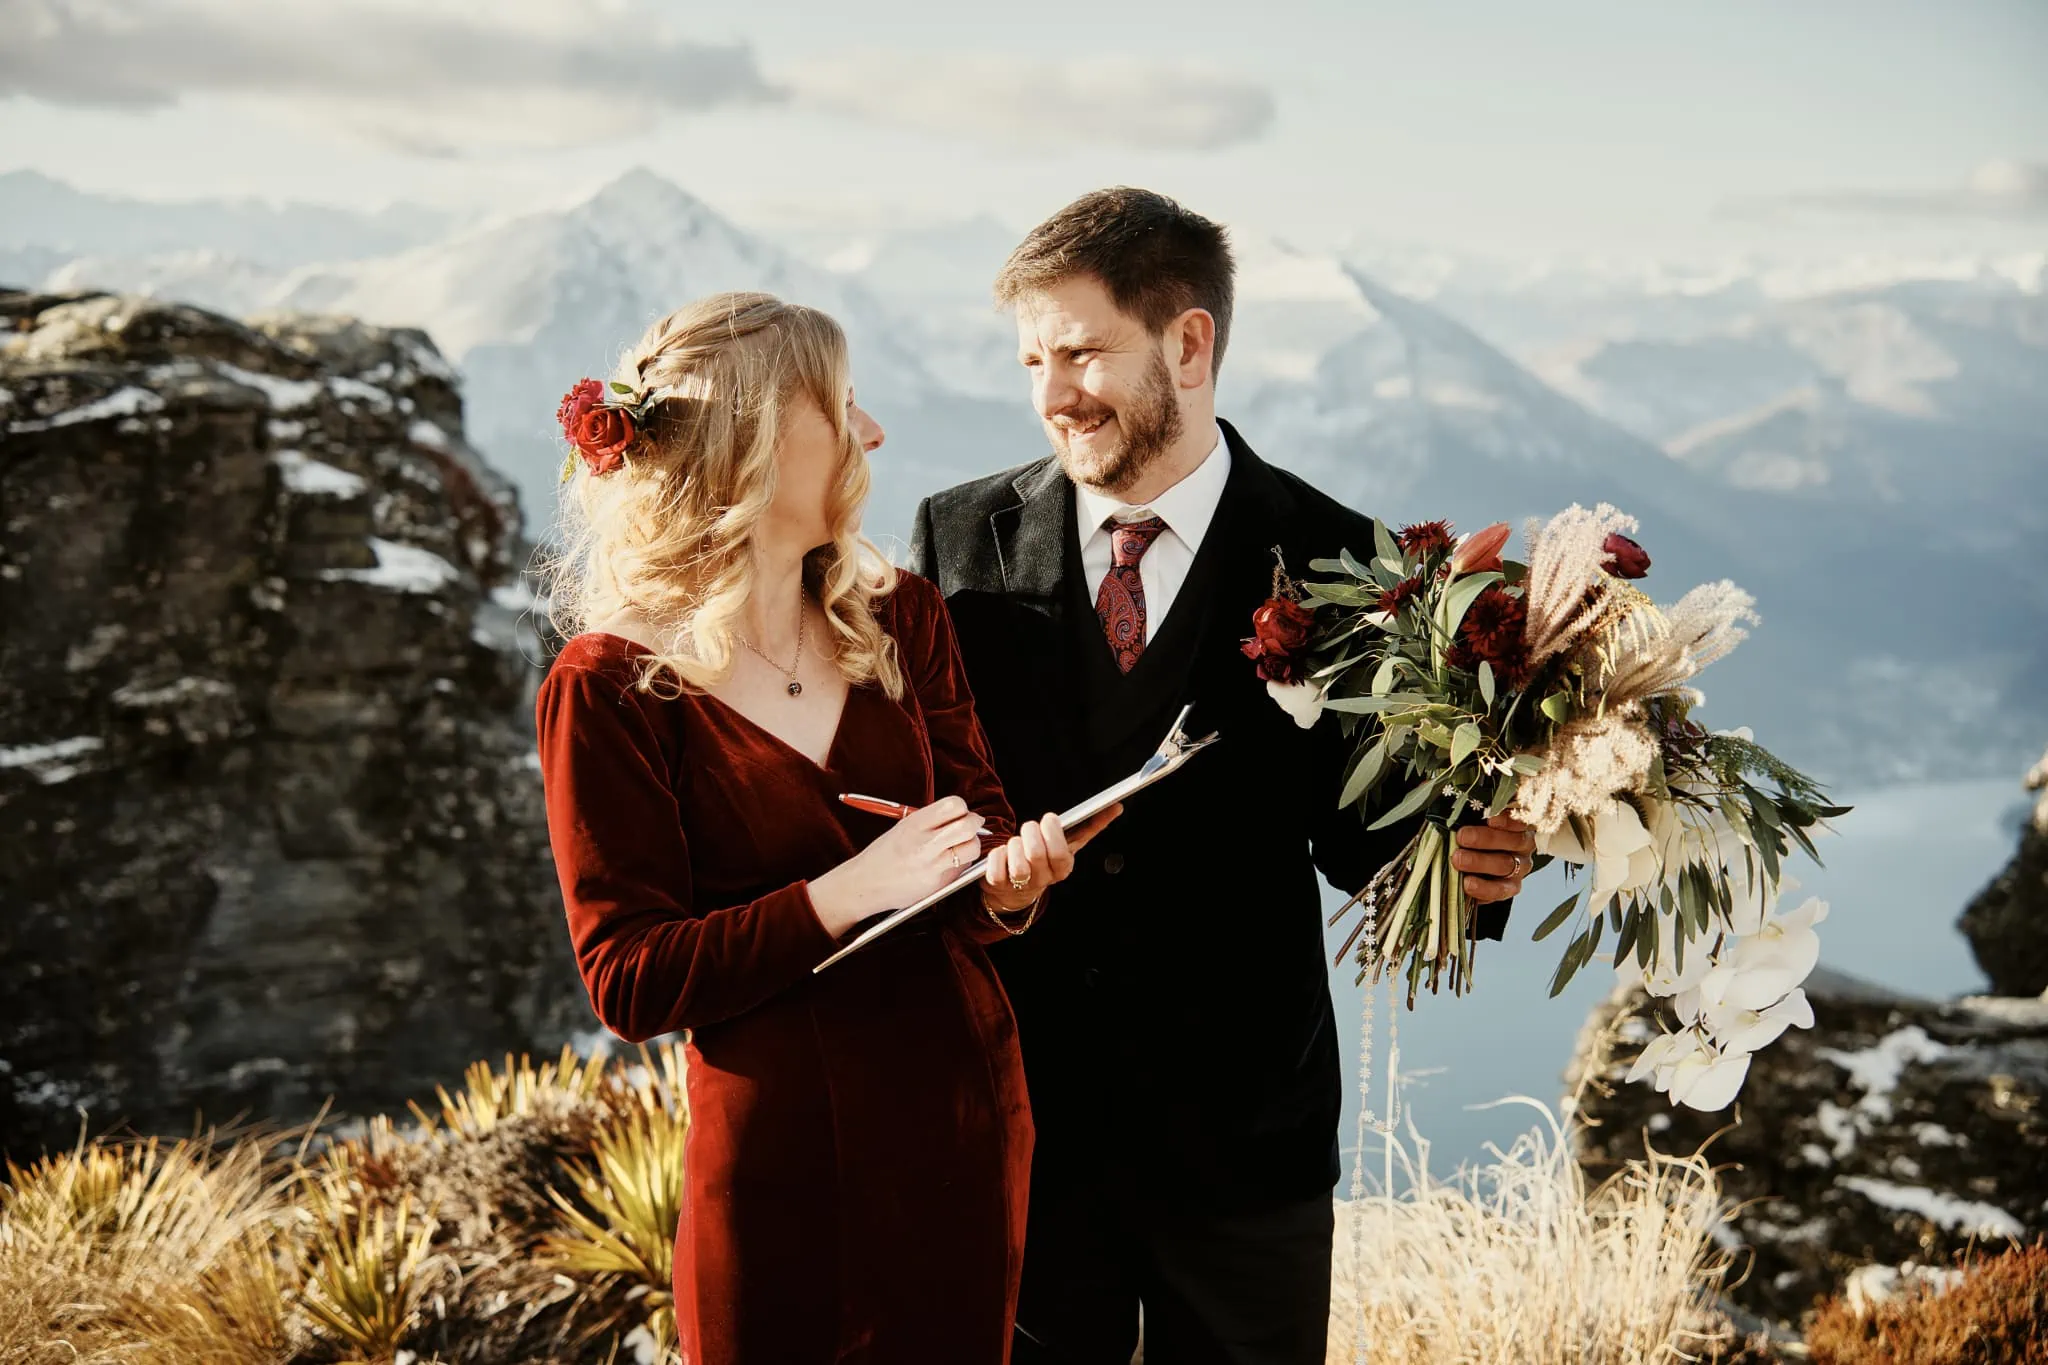 Claire and Rob exchange floral vows during their heli elopement wedding on Cecil Peak.